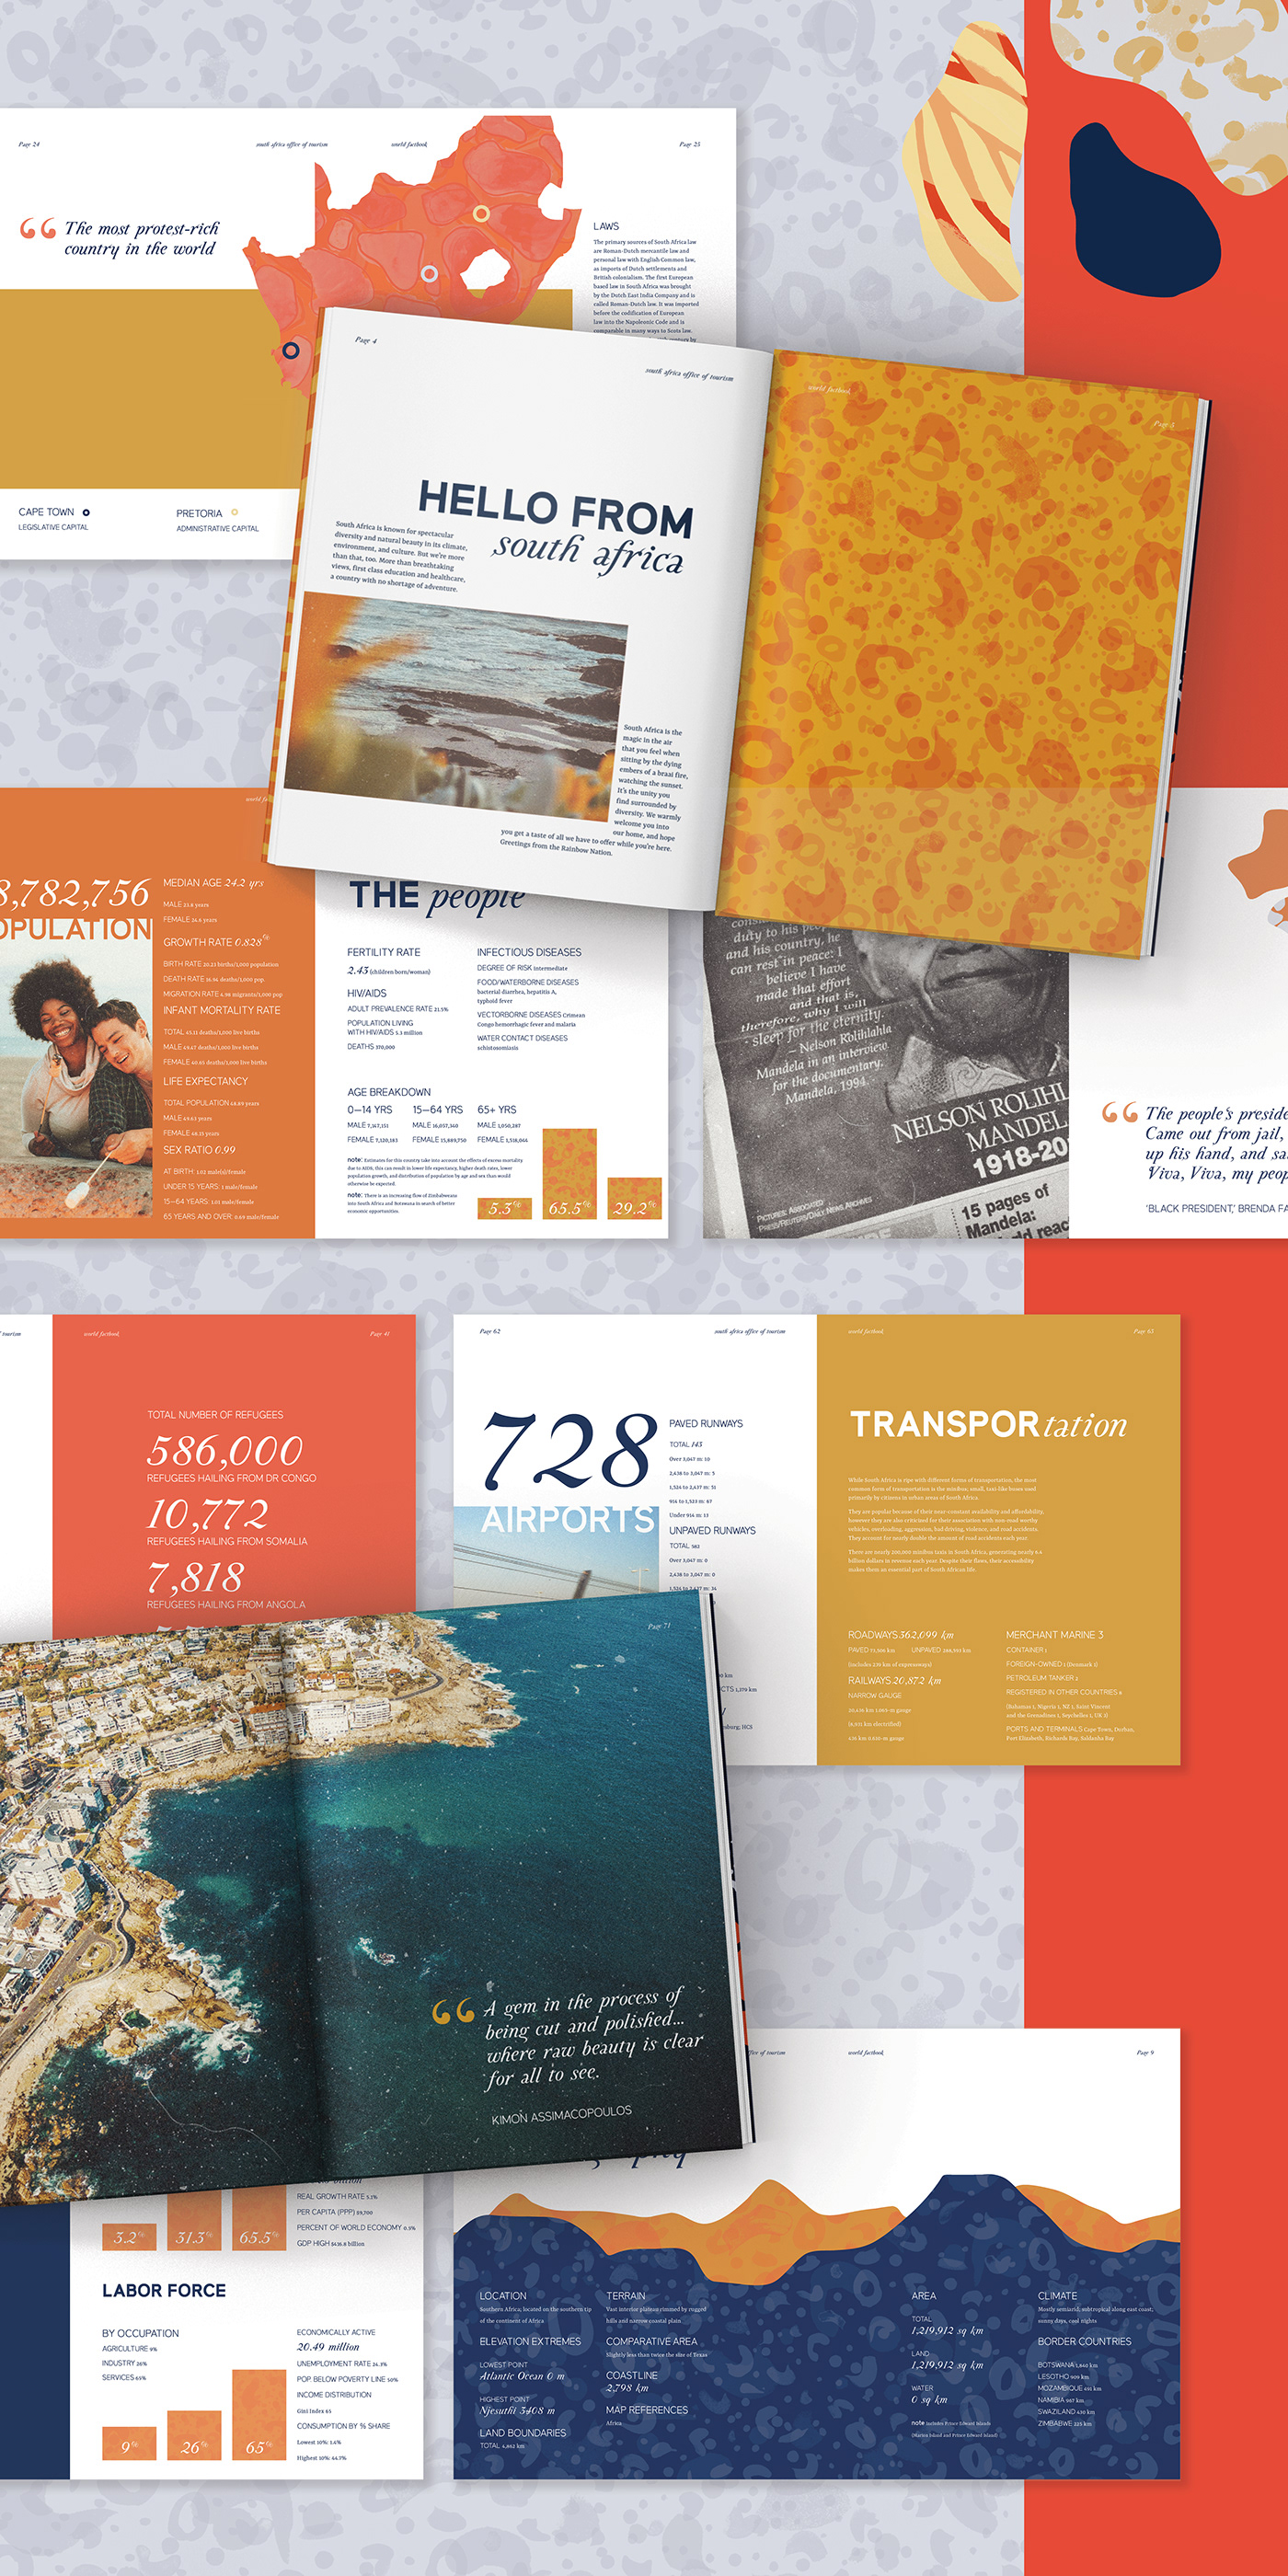 factbook south africa tourism fact book branding  Printing brand guidelines african ILLUSTRATION 